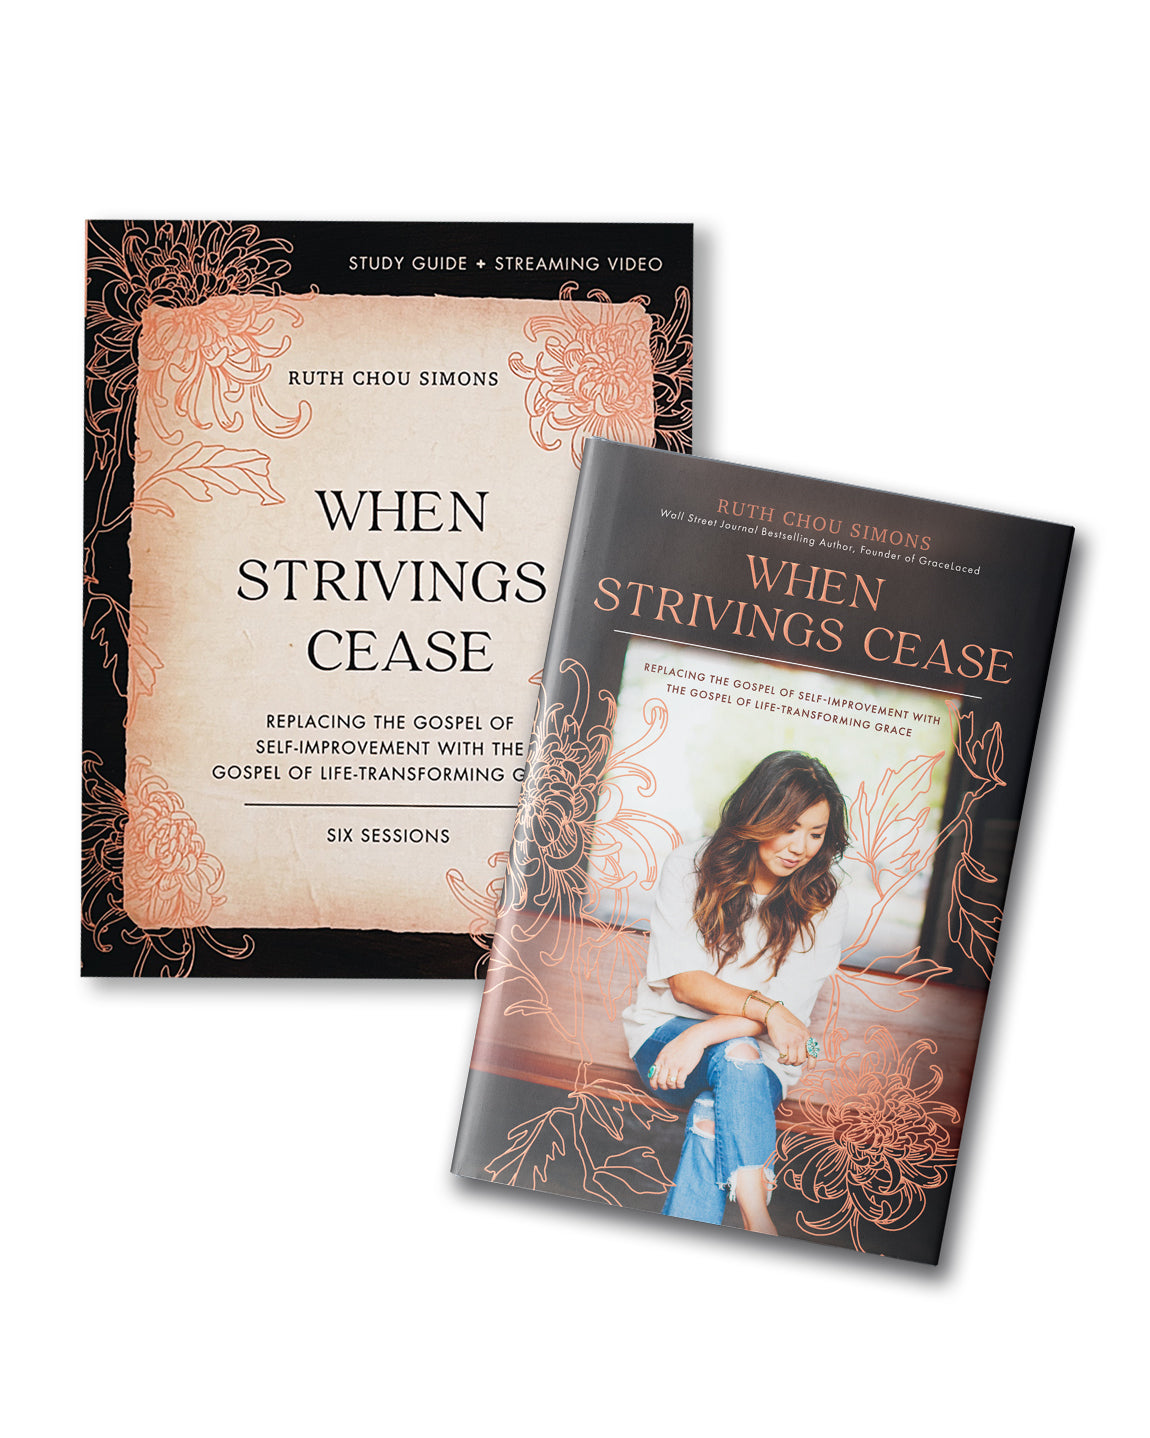 When Strivings Cease Book and Bible Study Bundle {Signed Copy}